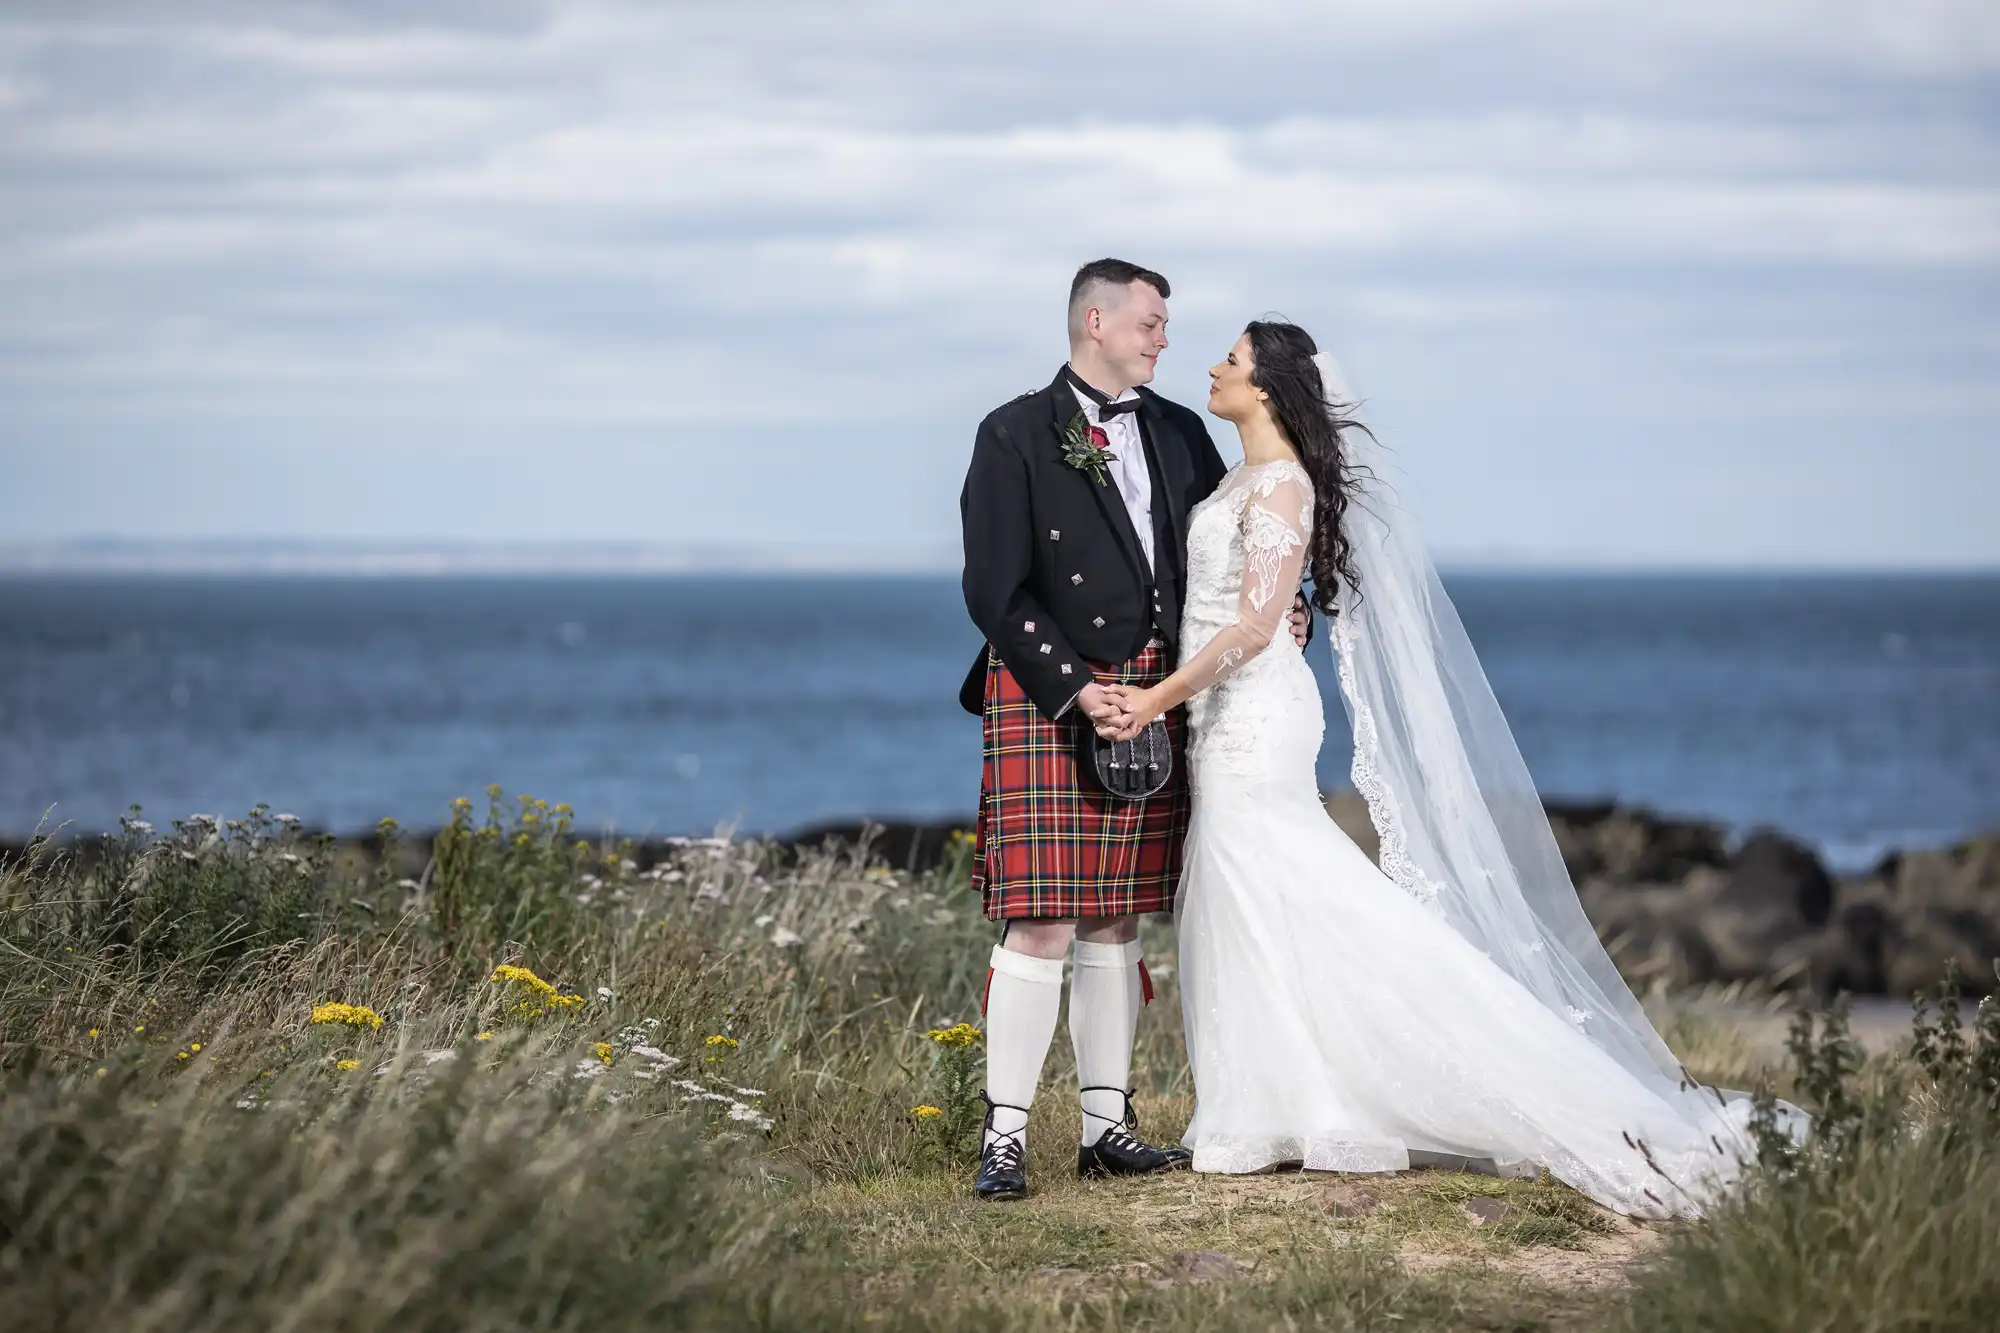 A bride and groom in wedding attire share a tender moment by the seaside, with the groom wearing a traditional kilt. Marine Hotel wedding photographers.